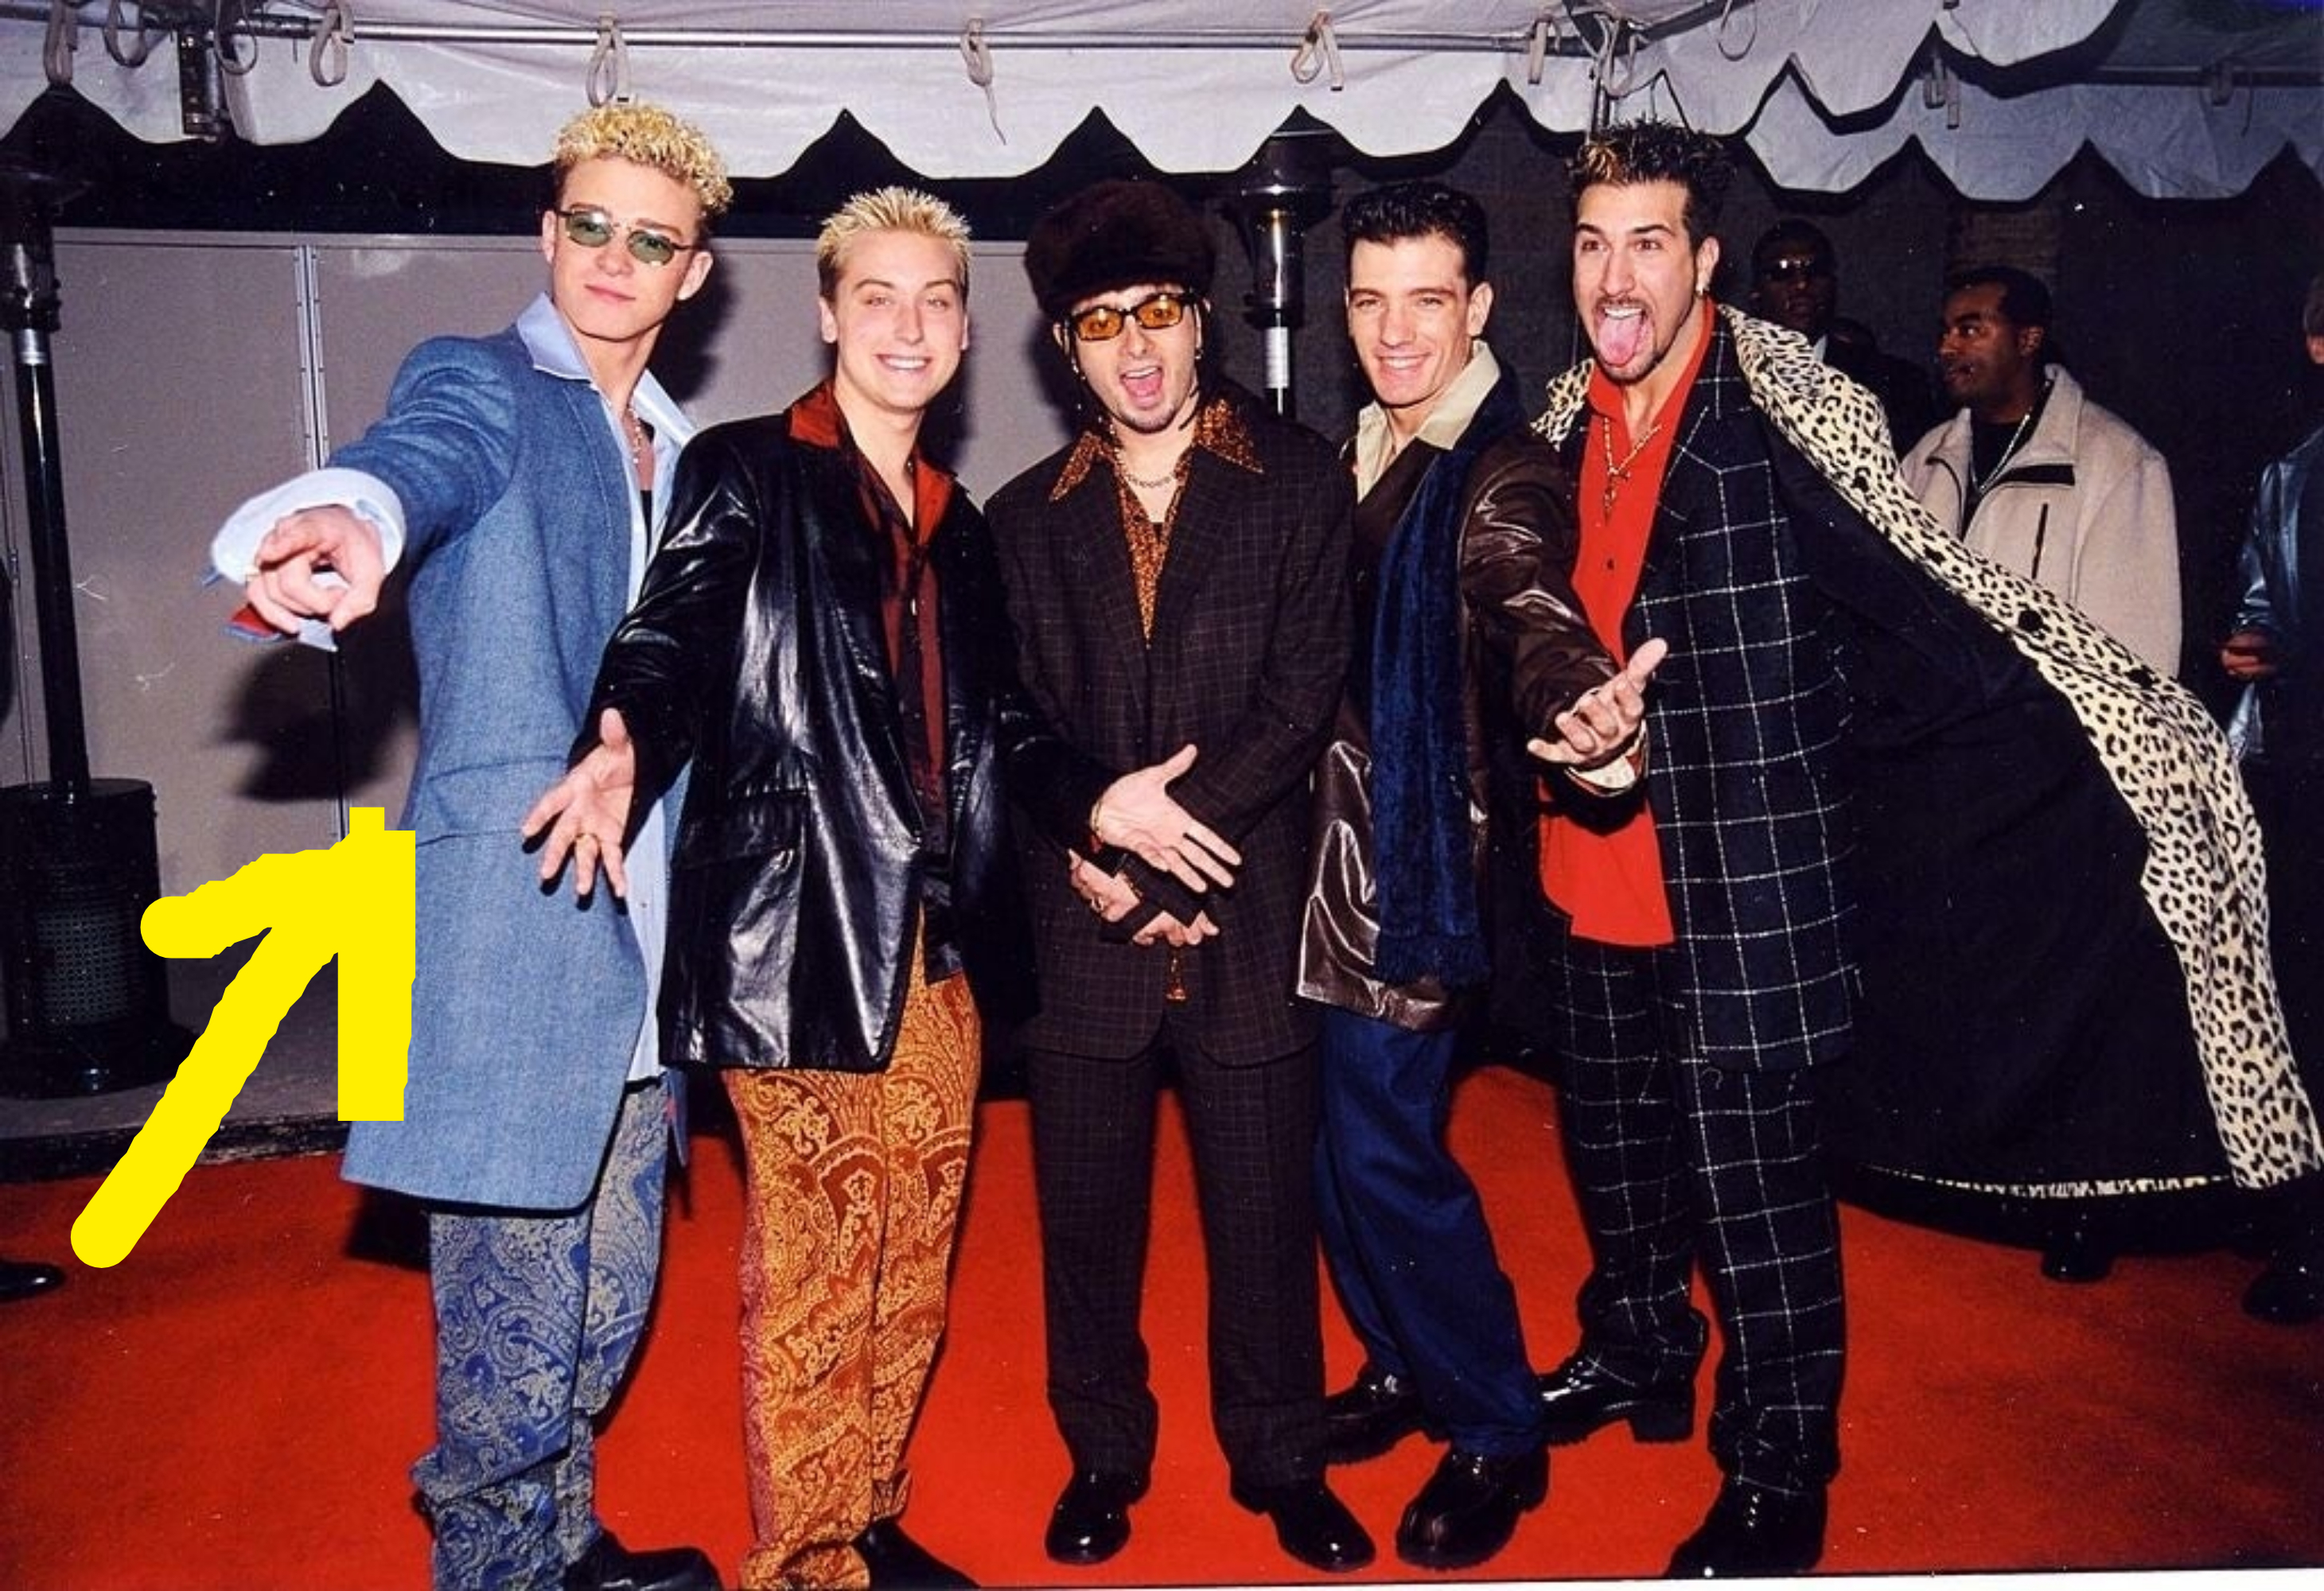 justin with the rest of nsync on the red carpet